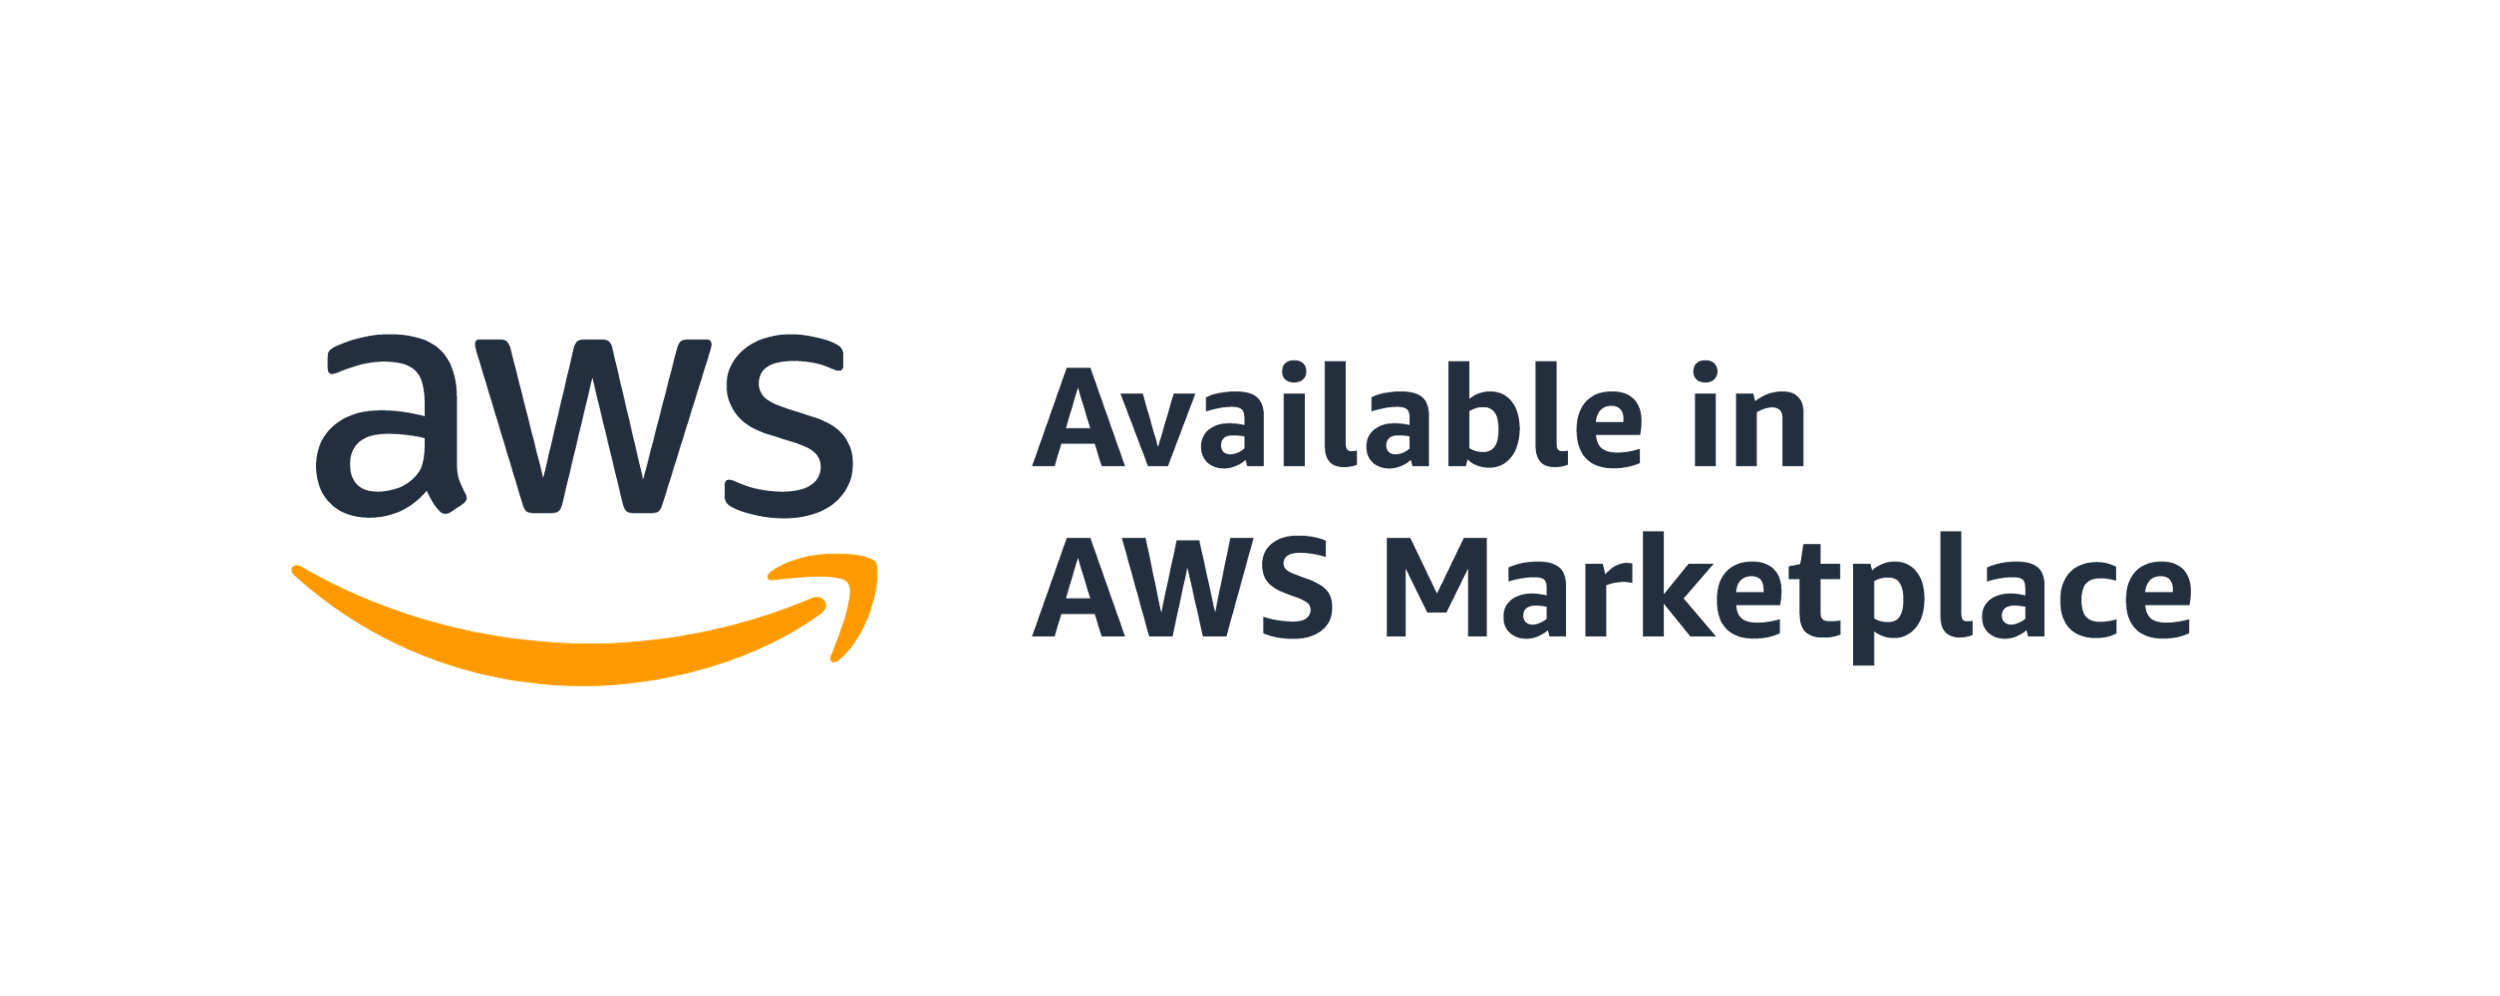 AWS-Marketplace_logos_Attribution_Available-in-Marketplace_RGB-1